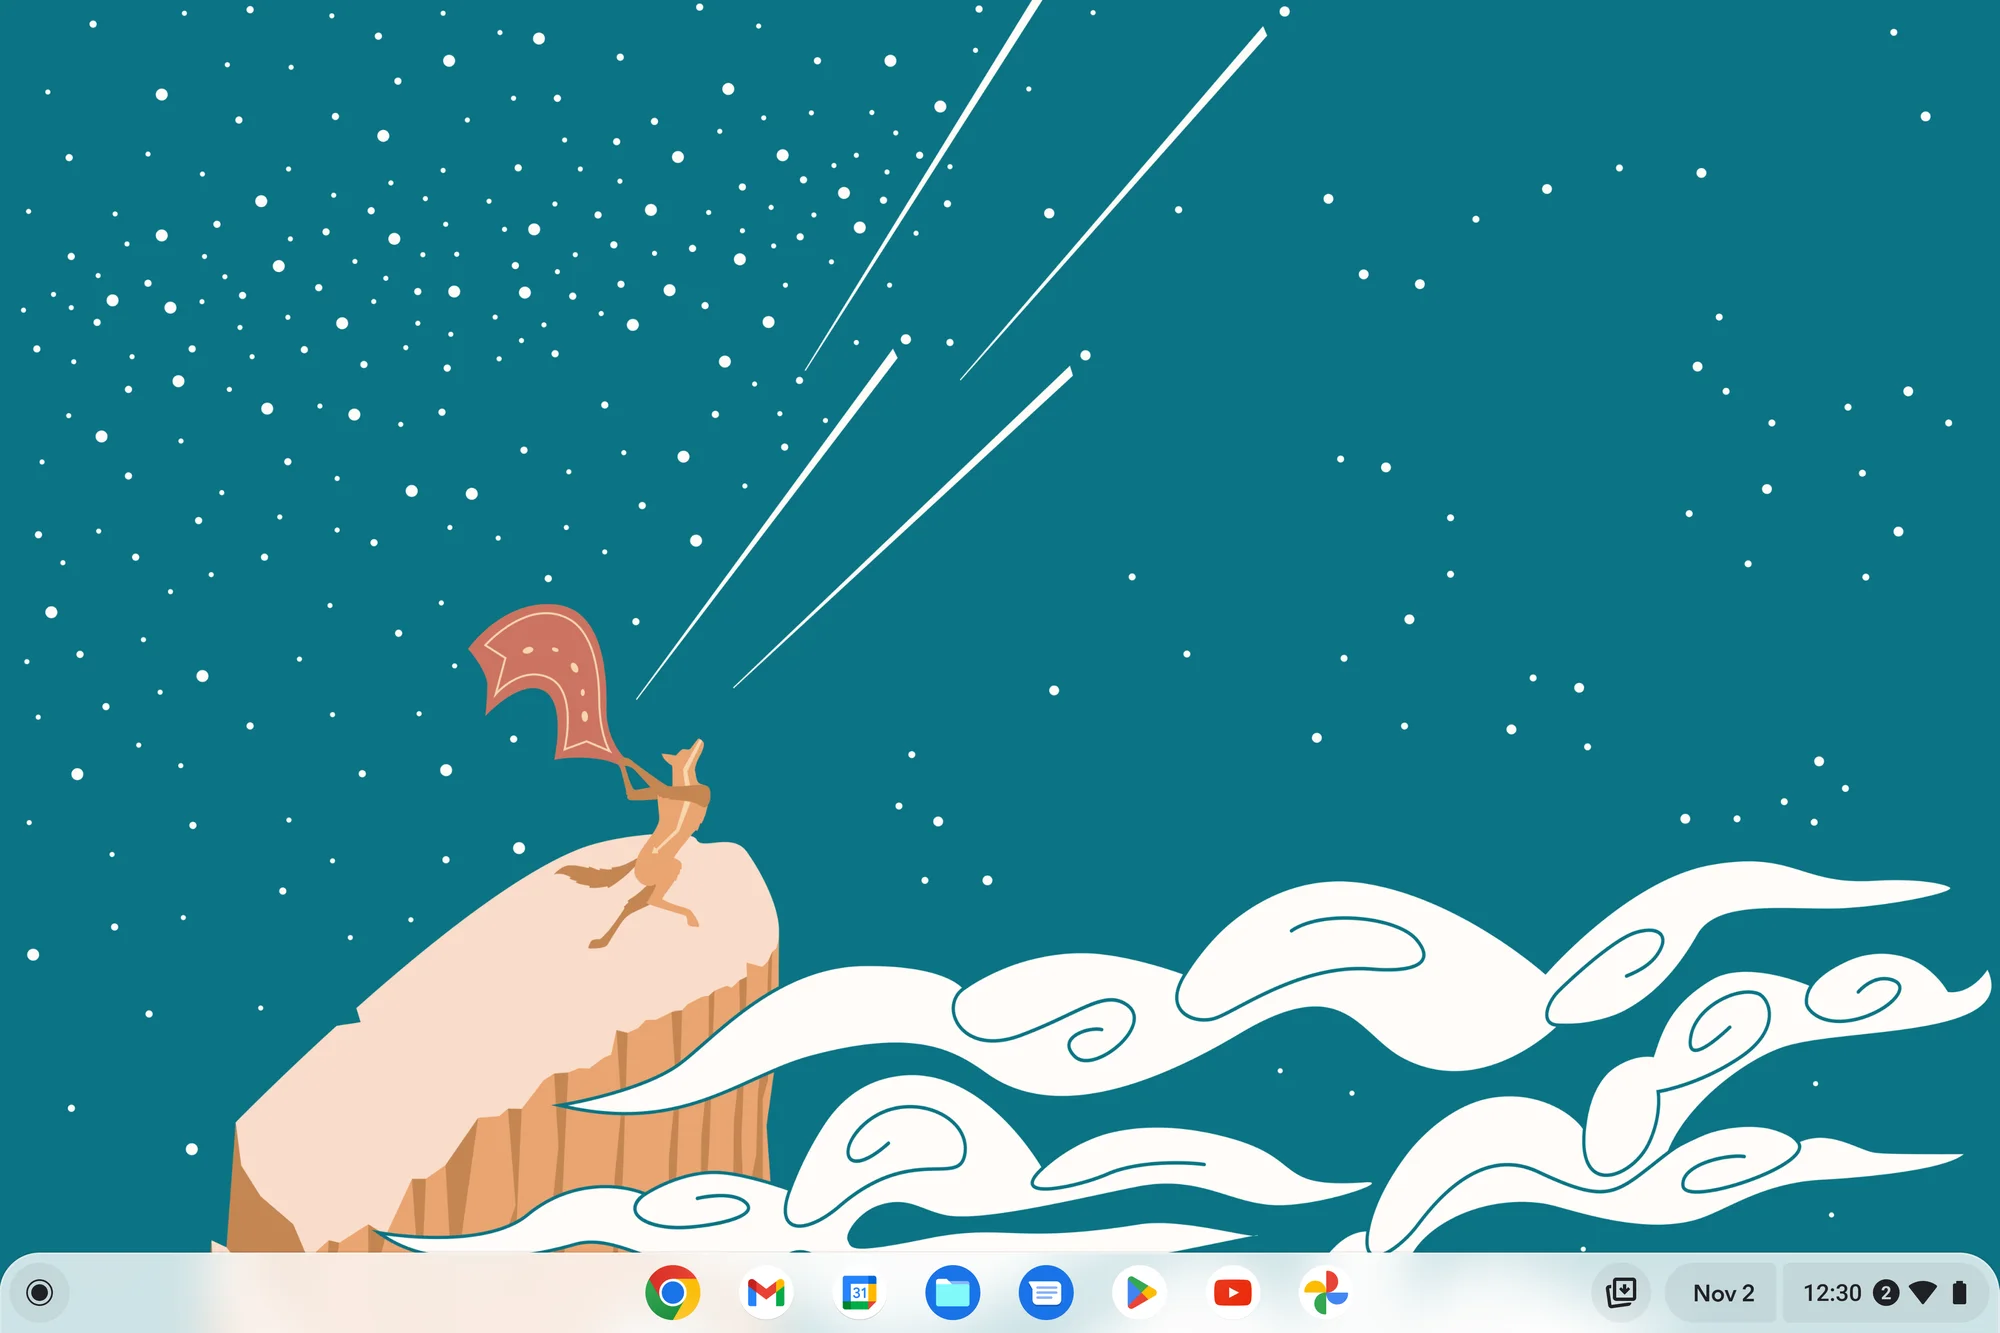 A Chromebook wallpaper with an image of a coyote on a hillside with a constellation of stars in the background.